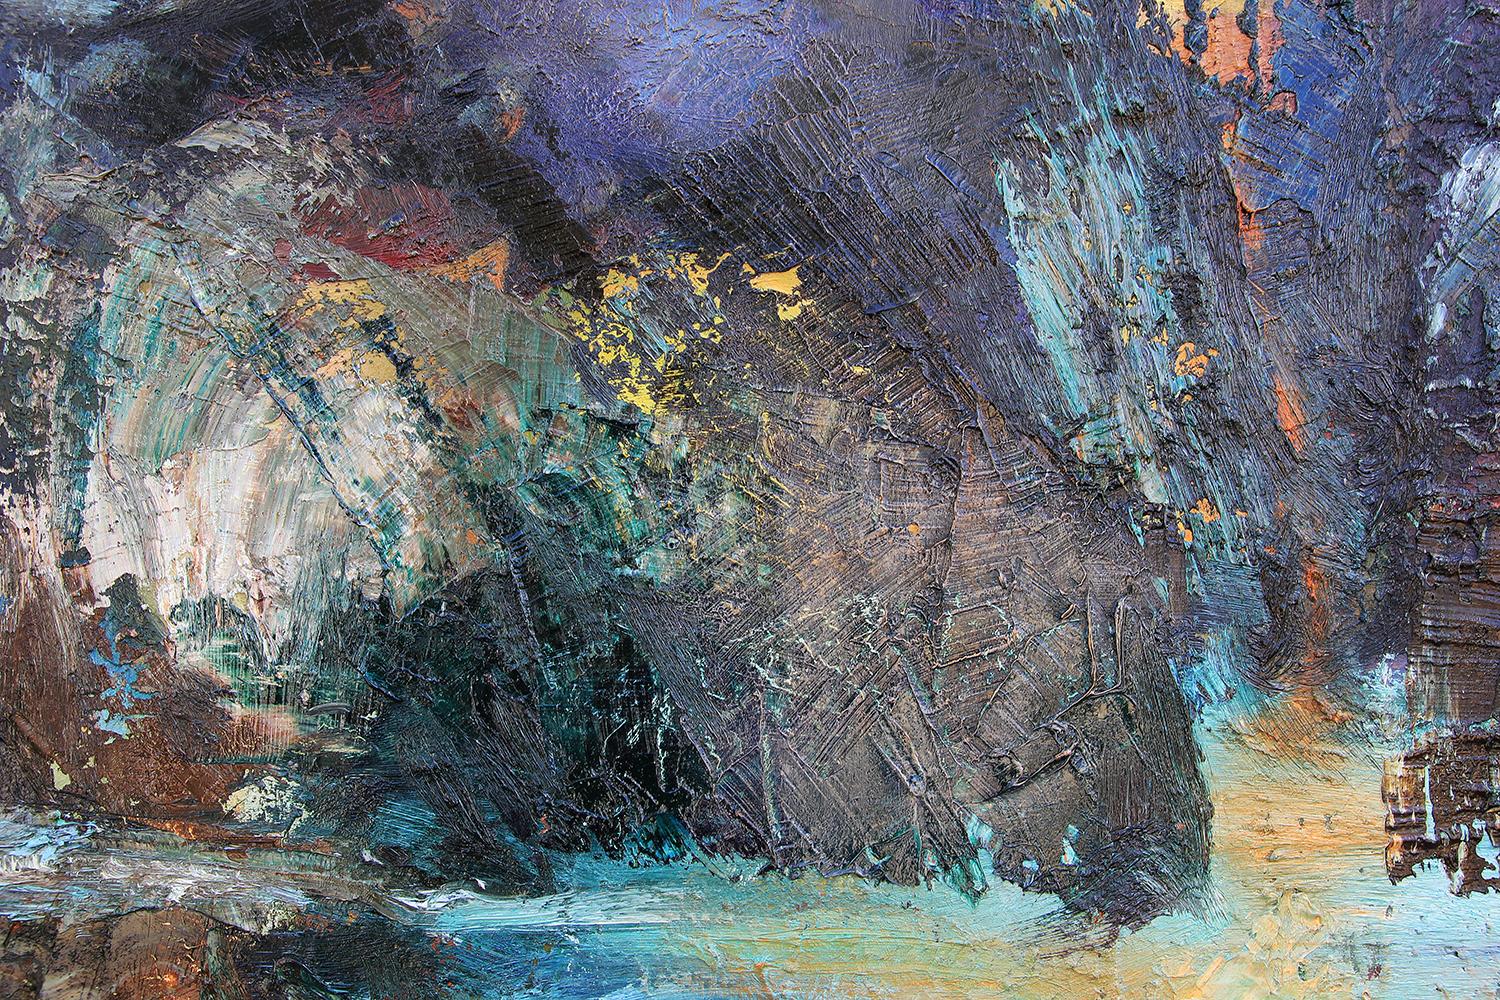 Blue toned abstract impressionist landscape by Houston, Texas artist Sha Mo depicting land, waterfalls, and mountains. Signed by artist at the bottom right. Framed in a gold wooden frame.

Dimensions Without Frame: H 30 in. x W 38.13 in. x D .75 in. 